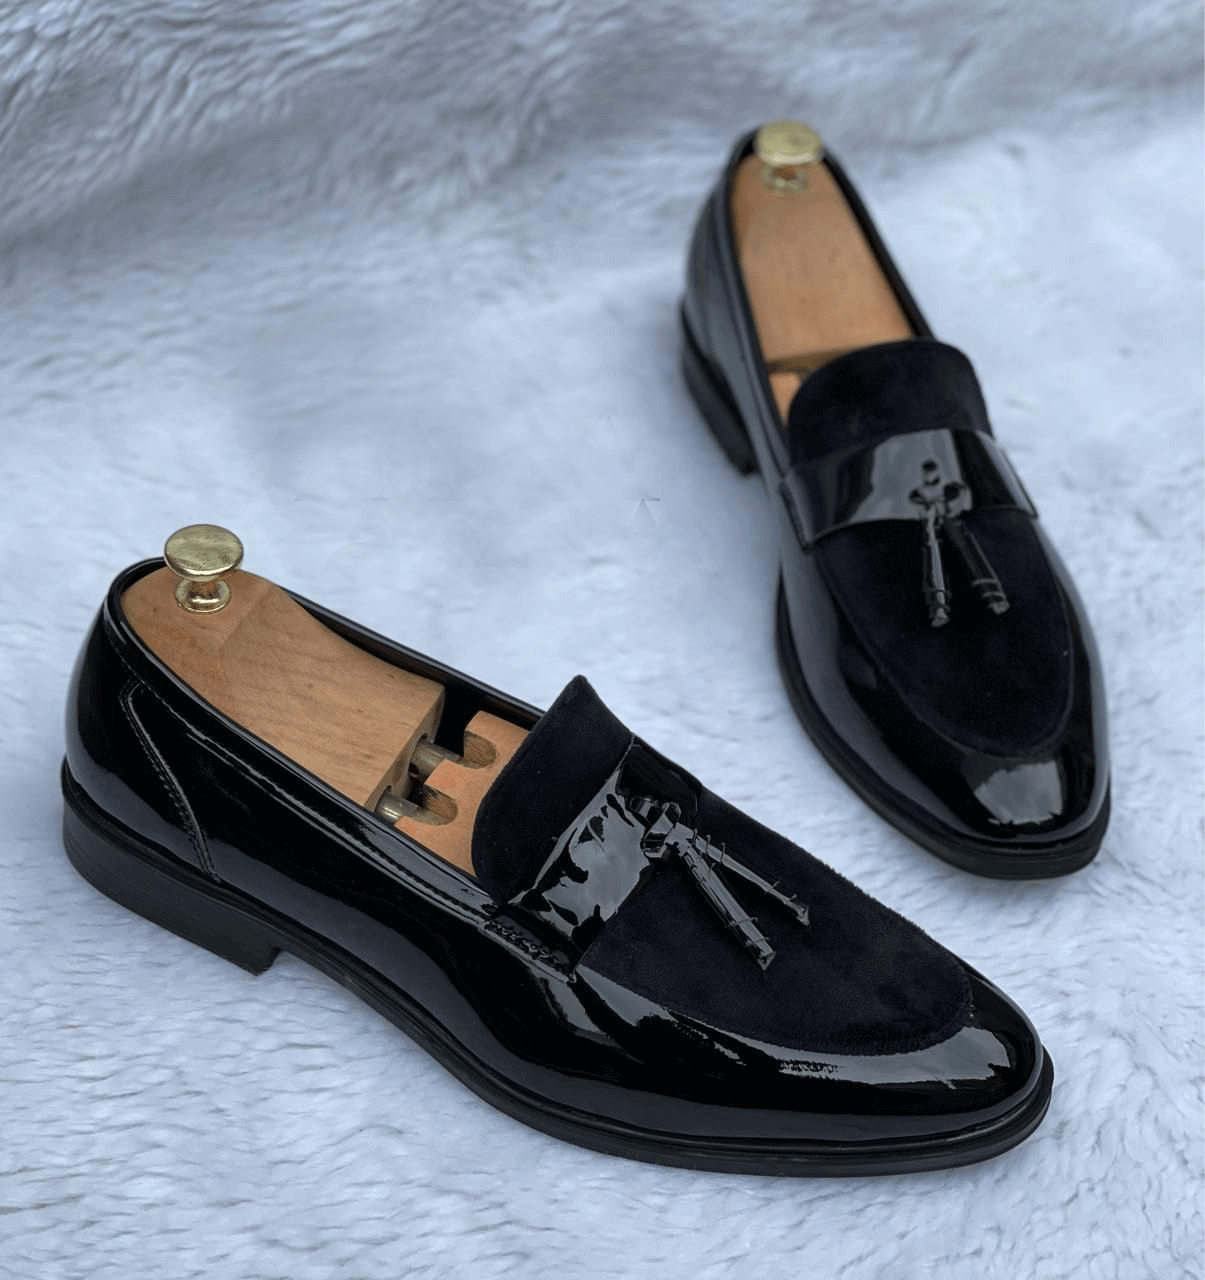 High Quality Wrinkle Free Patent Shiny Material with Classy Suede Slip On Loafer-Unique and Classy